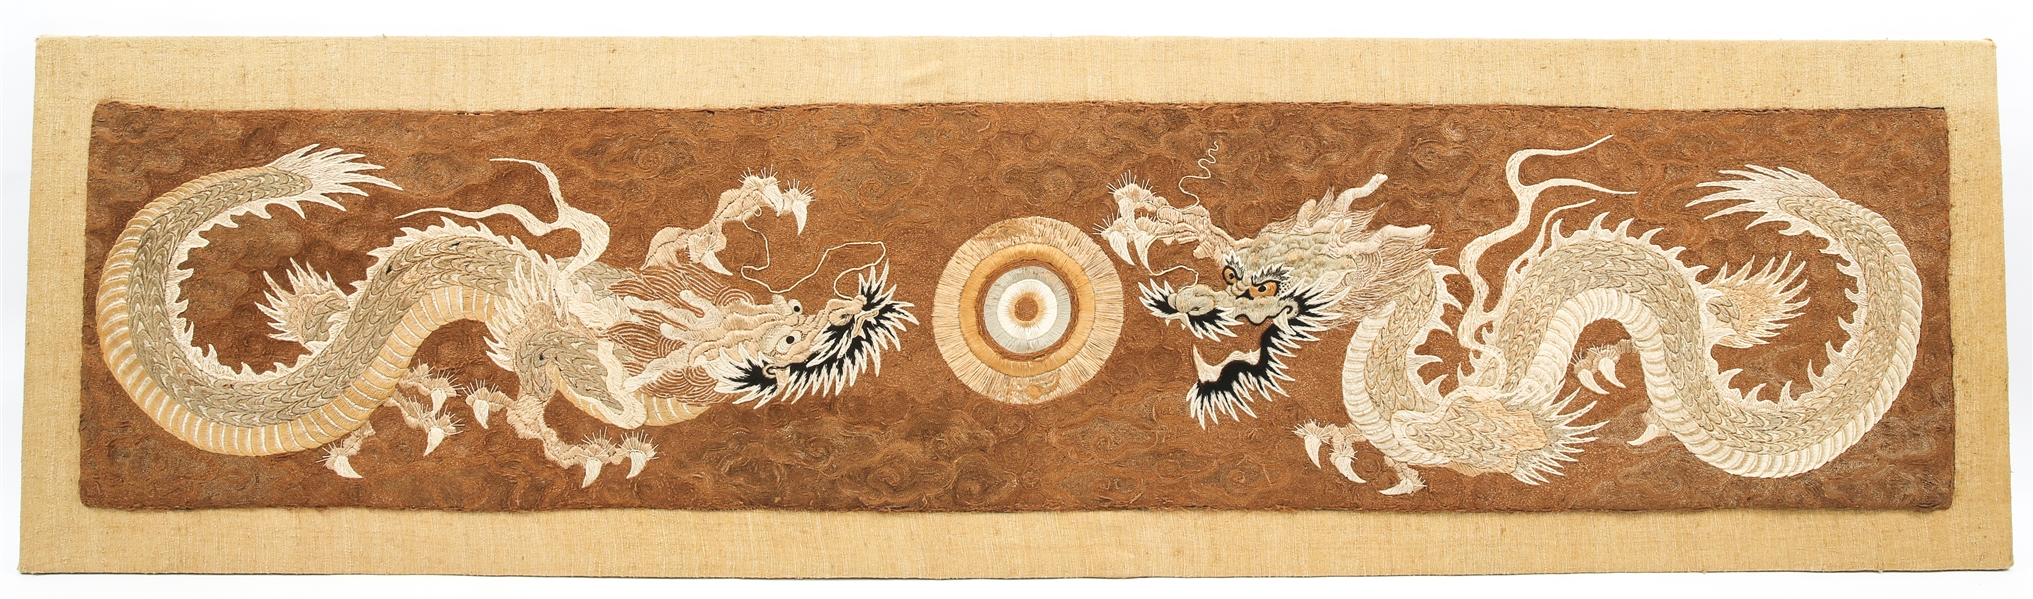 LARGE CHINESE SILK EMBROIDERED PANEL OF DRAGONS